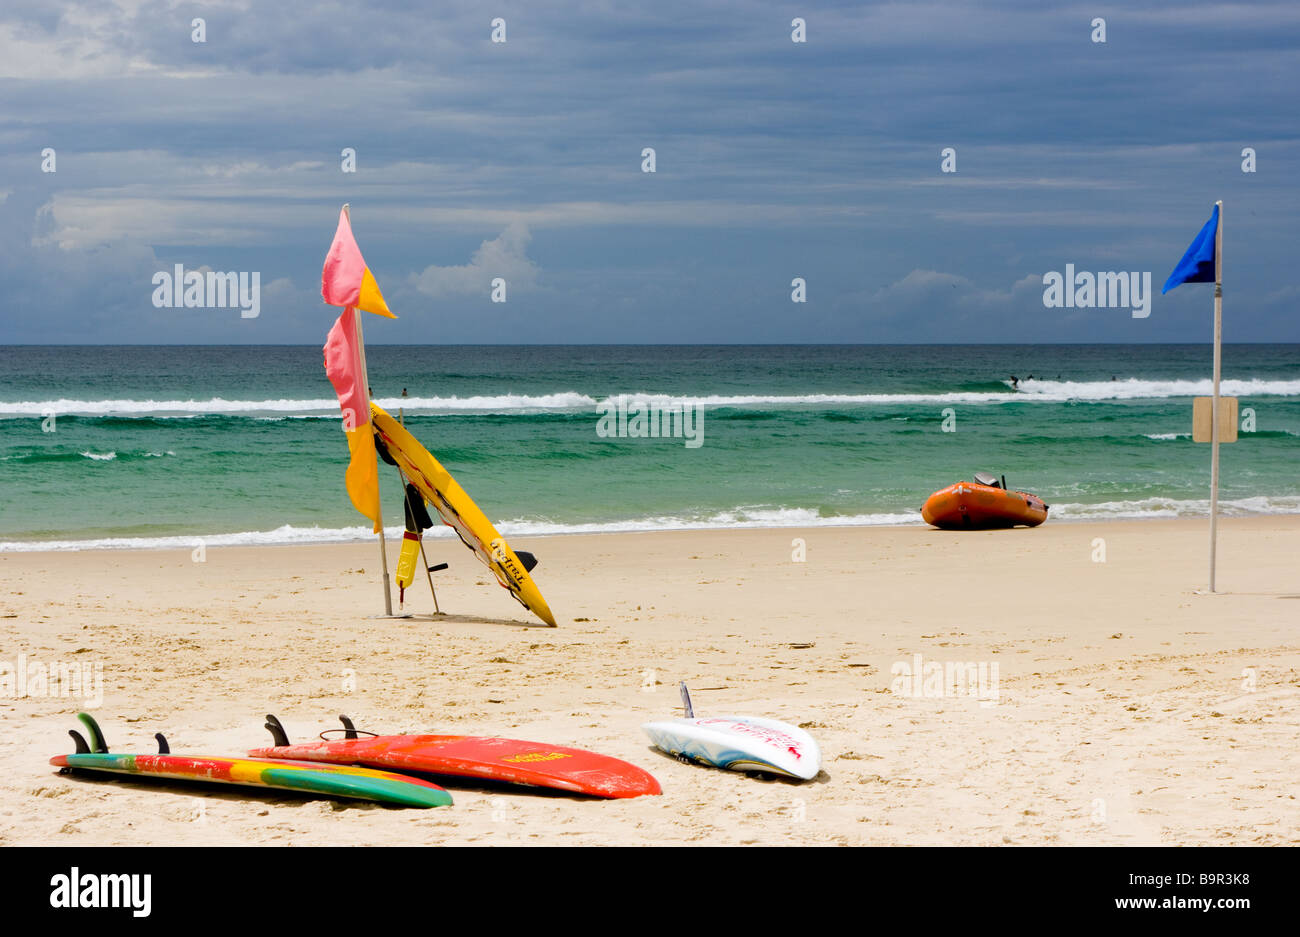 Empty beach with surfboards and lifeboat. Stock Photo